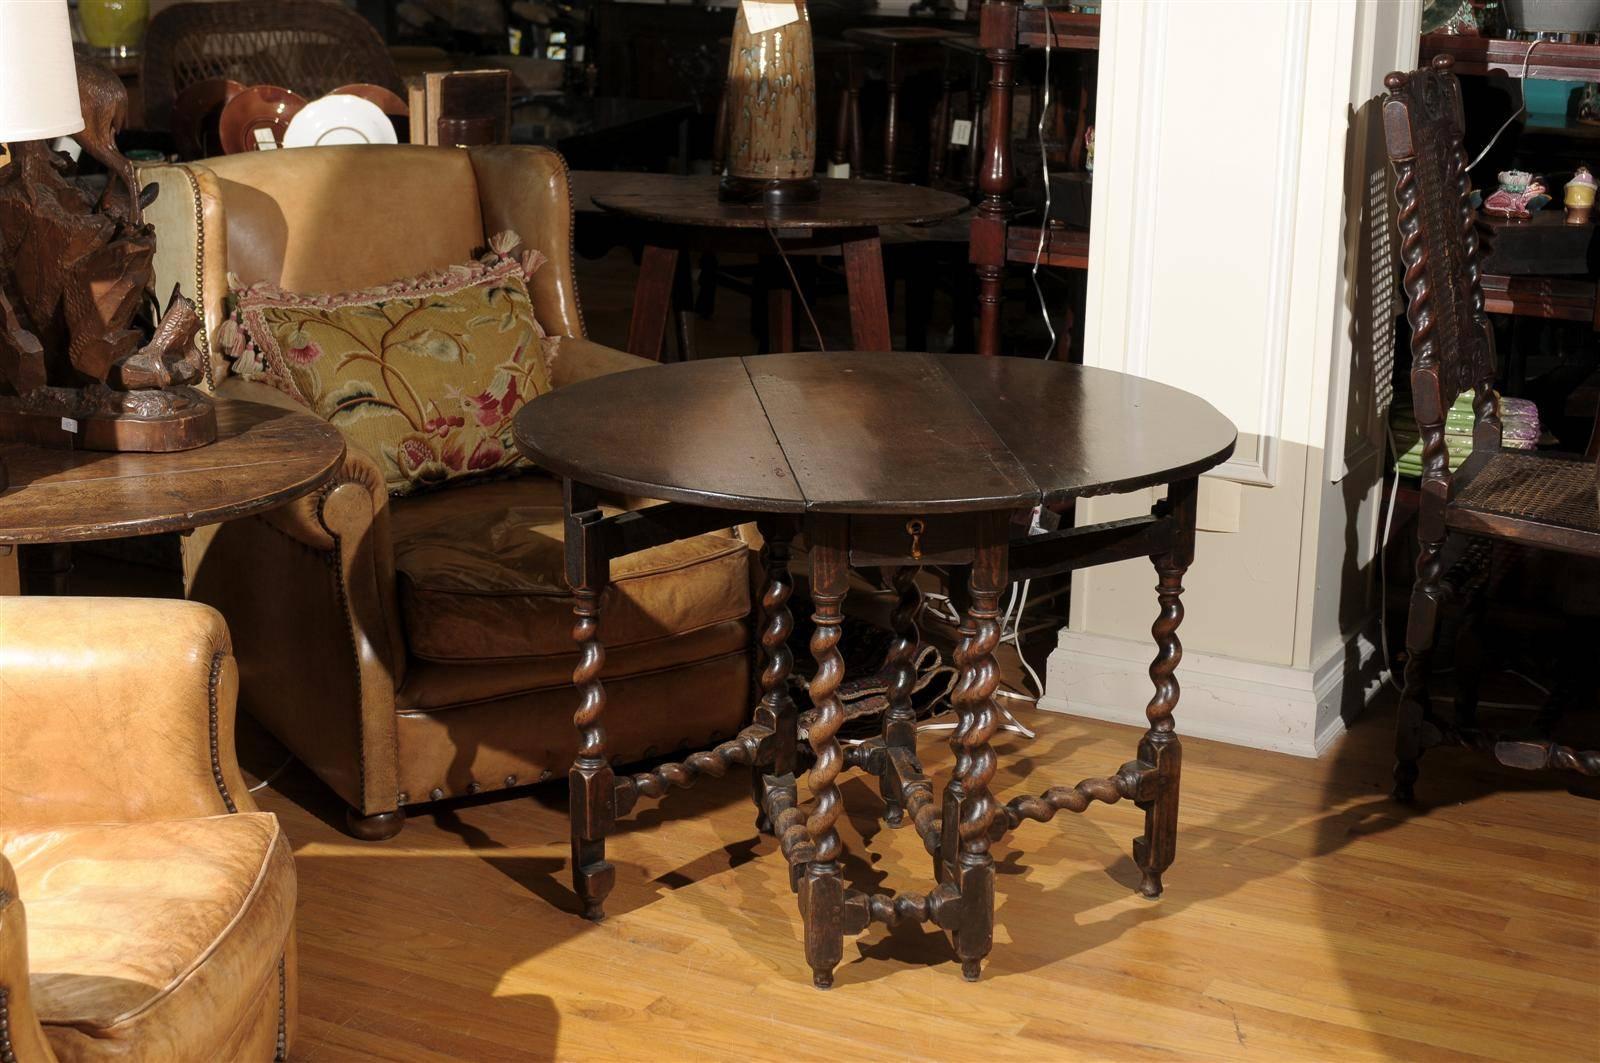 The table is made of dark oak with beautiful barley twist legs. There is a lovely patina to this piece. When the leaves are dropped the table is only 11.5" wide. Each leaf drops 14" which allows for a total of over almost 40" if